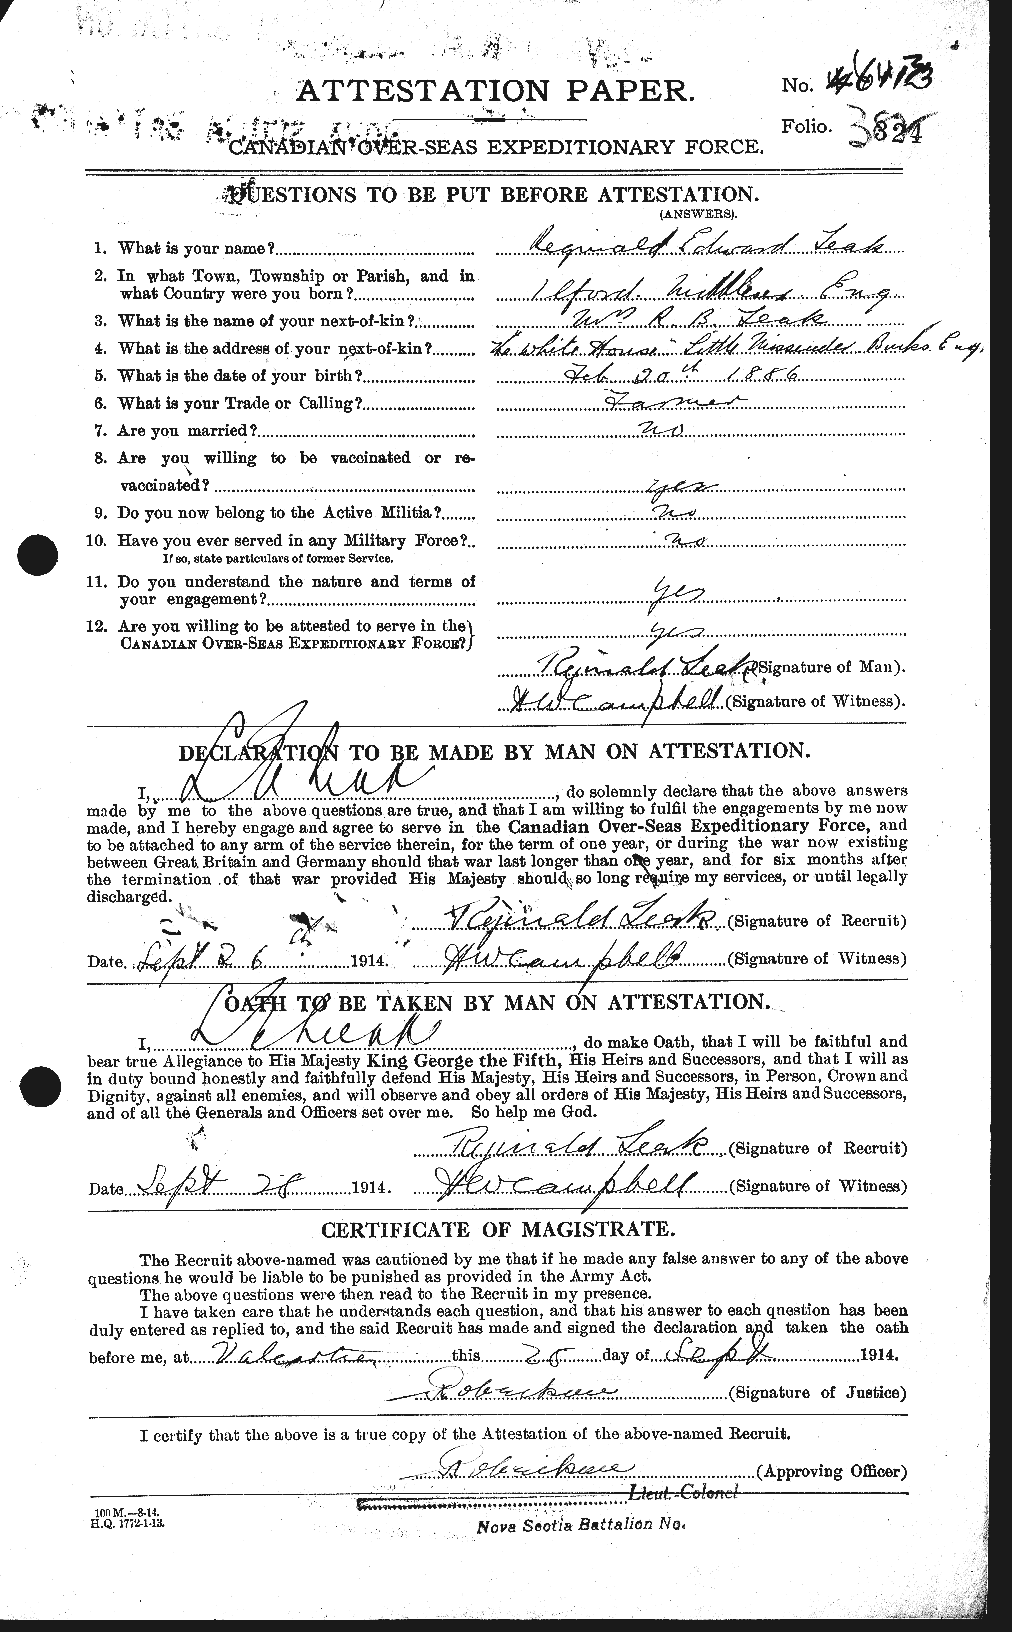 Personnel Records of the First World War - CEF 455971a